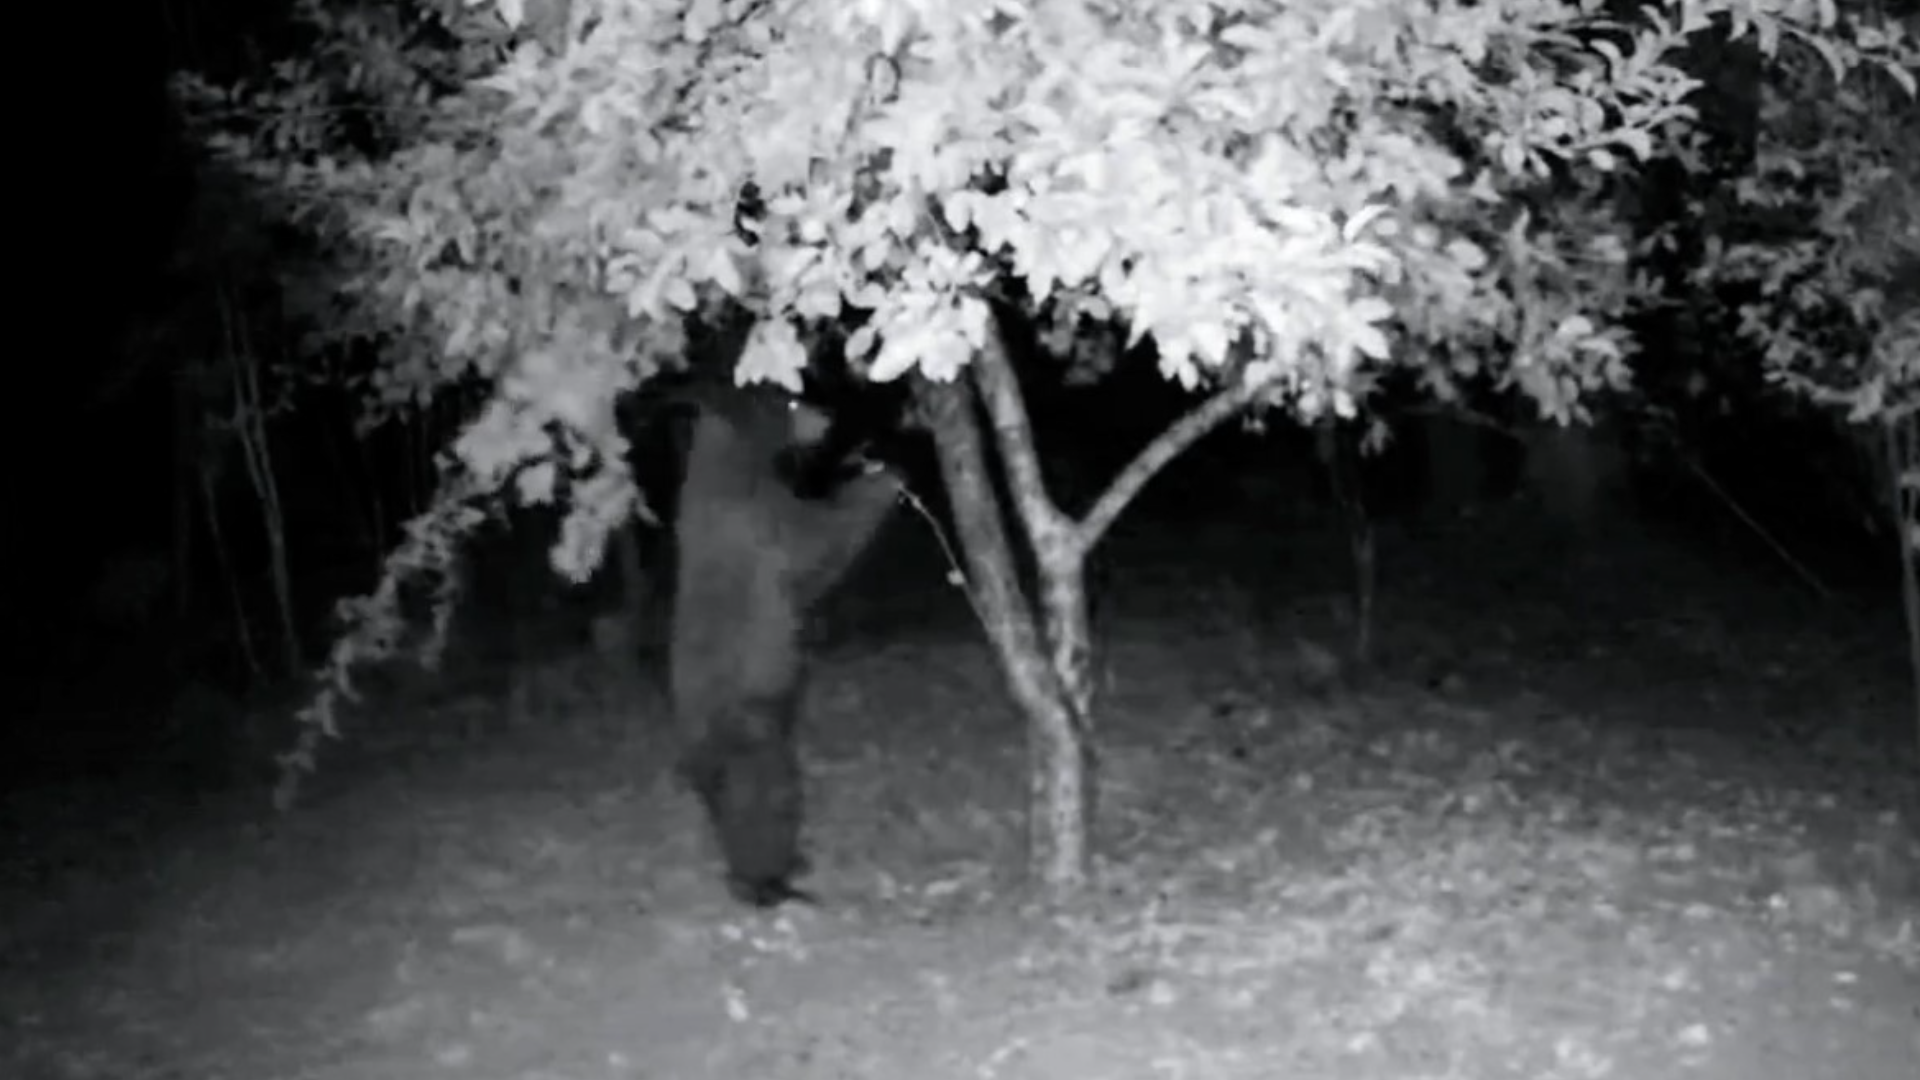 A bear in Georgetown, California, was seen on camera Nov. 3 standing on its hind legs and taking fruit from an apple tree in Dayna Hawes’ backyard.